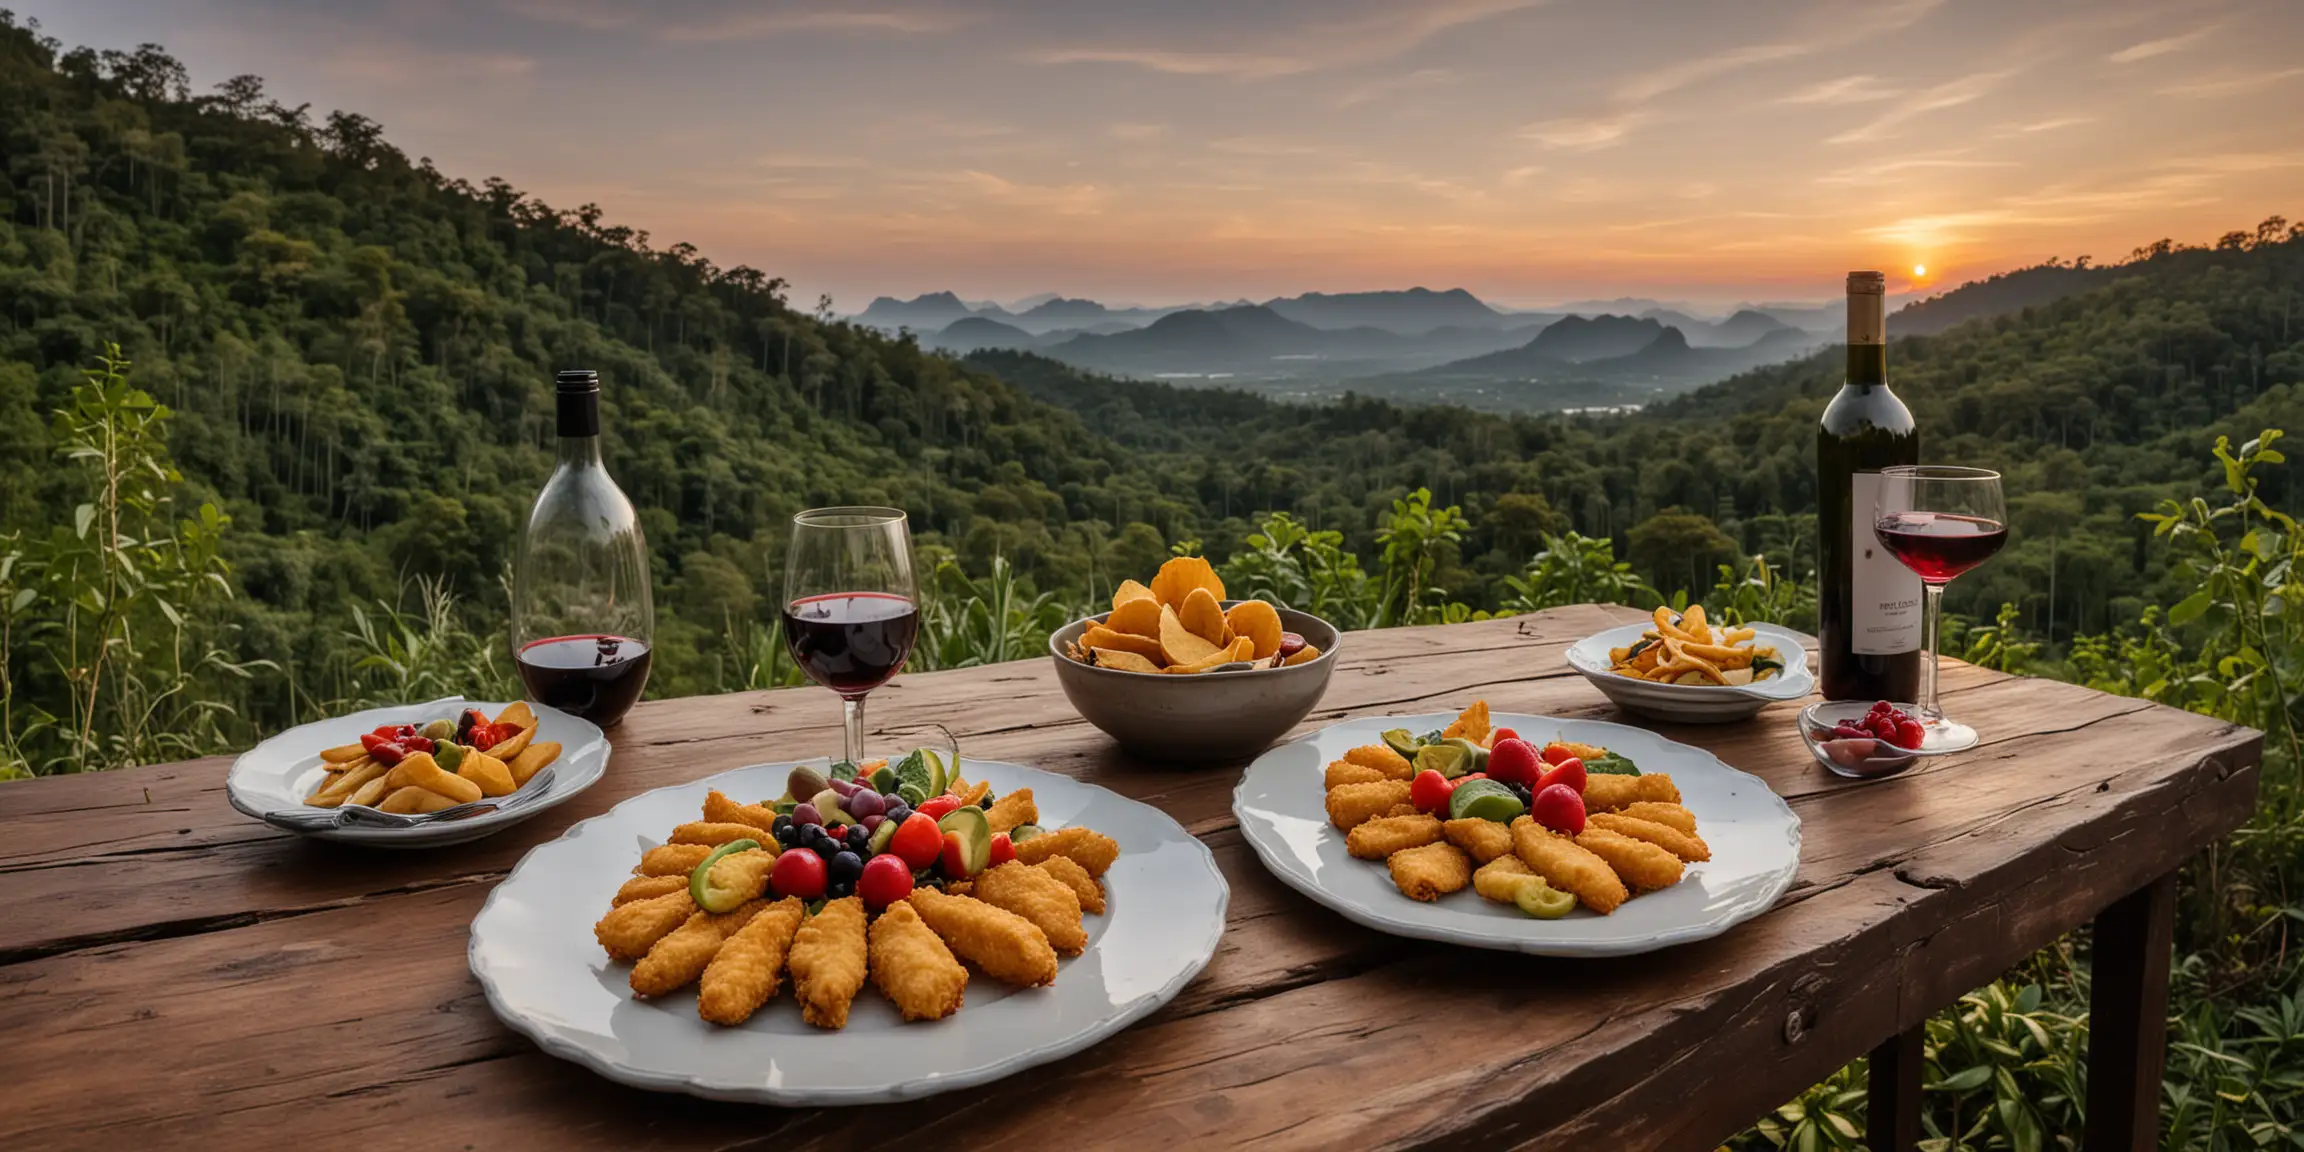 Natureinspired Dining Sumptuous Pescadito Frito and Fresh Fruits Amidst Northern Thailands Beauty